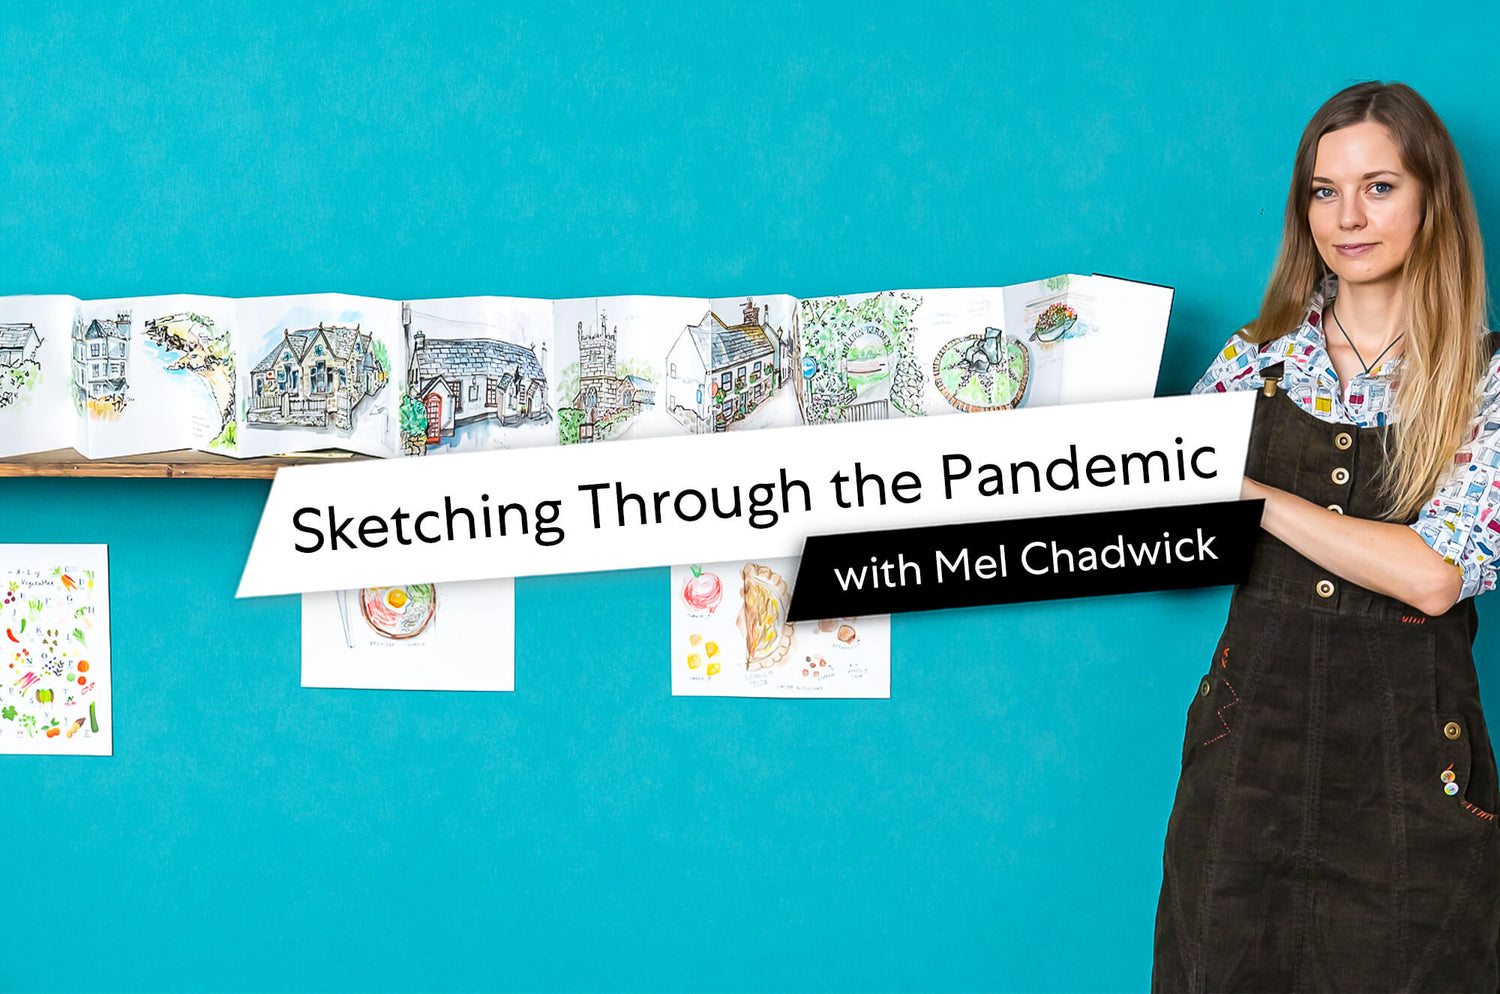 Sketching Through the Pandemic With Mel Chadwick